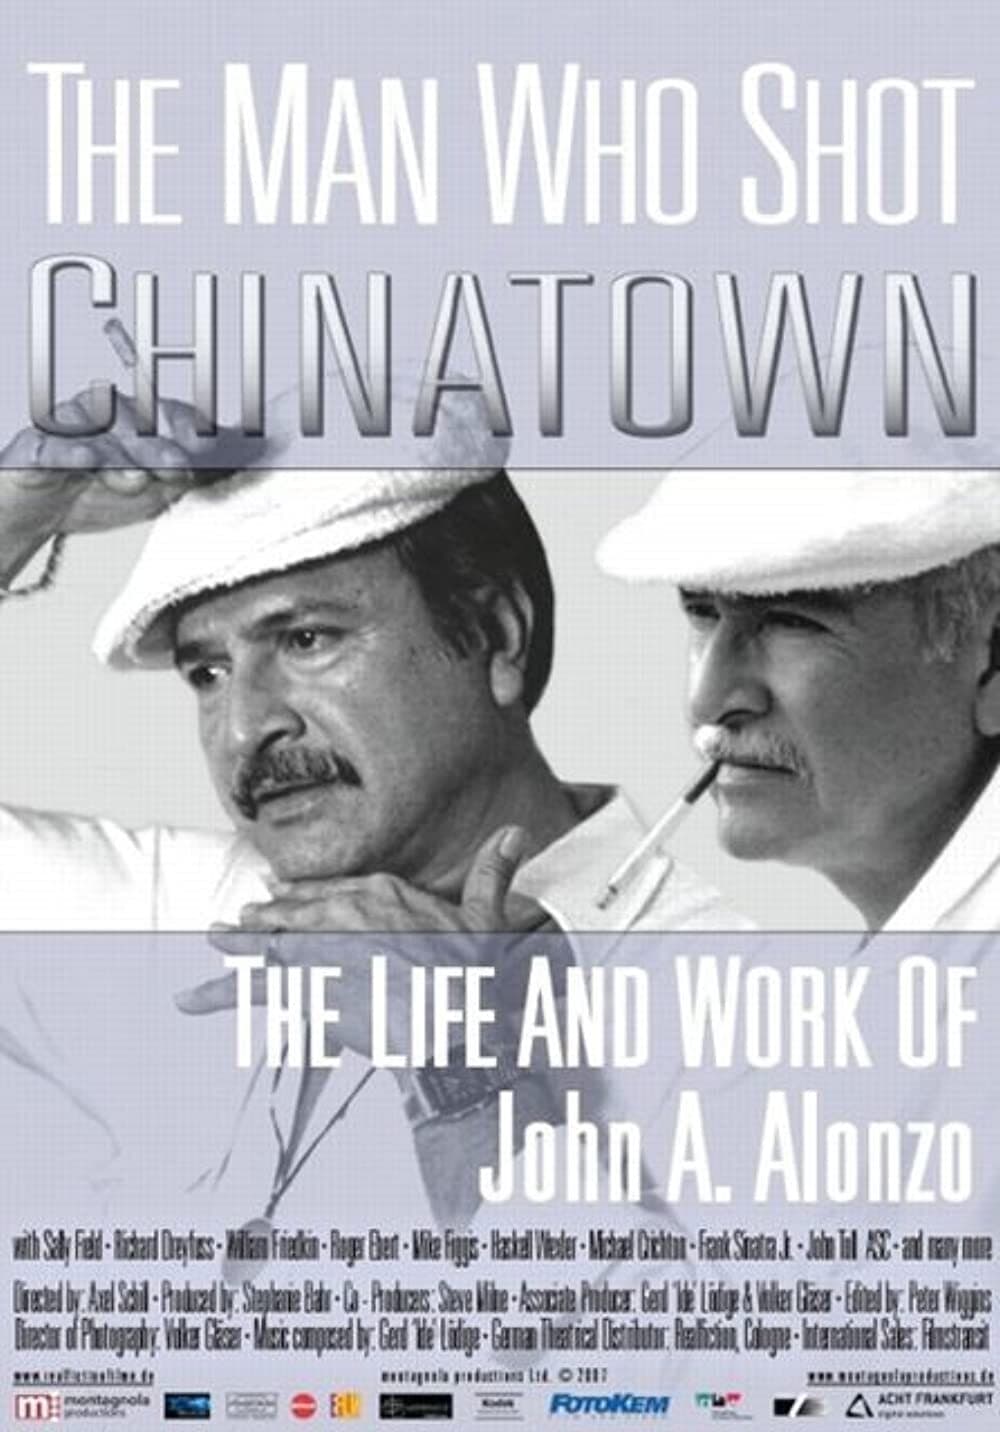 The Man Who Shot Chinatown: The Life and Work of John A. Alonzo (2007)